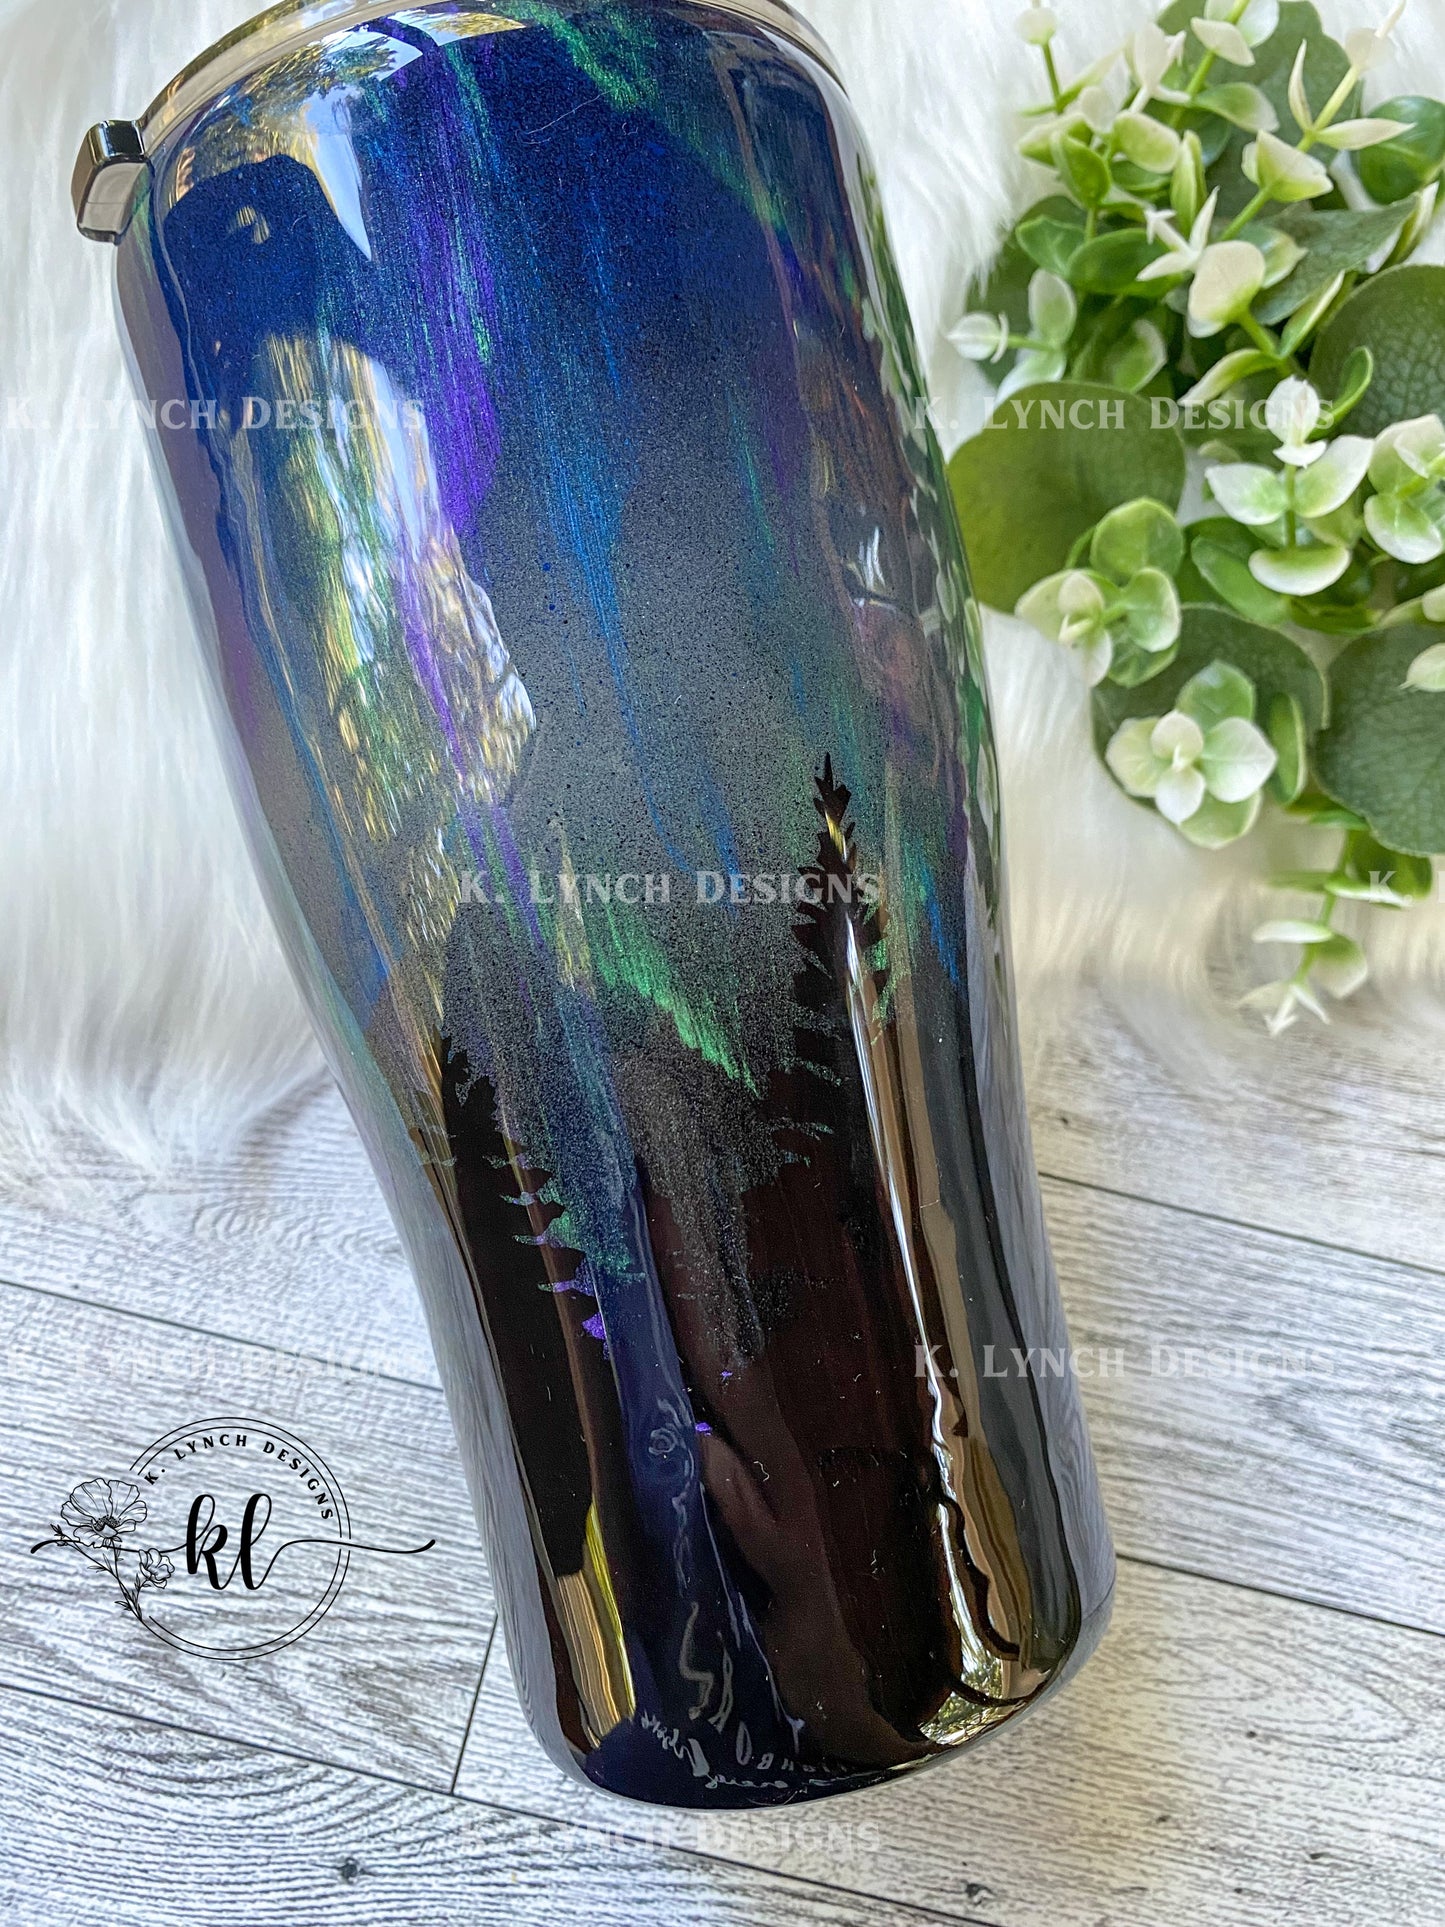 30 oz. "Not All Who Wander Are Lost" Northern Lights Tumbler